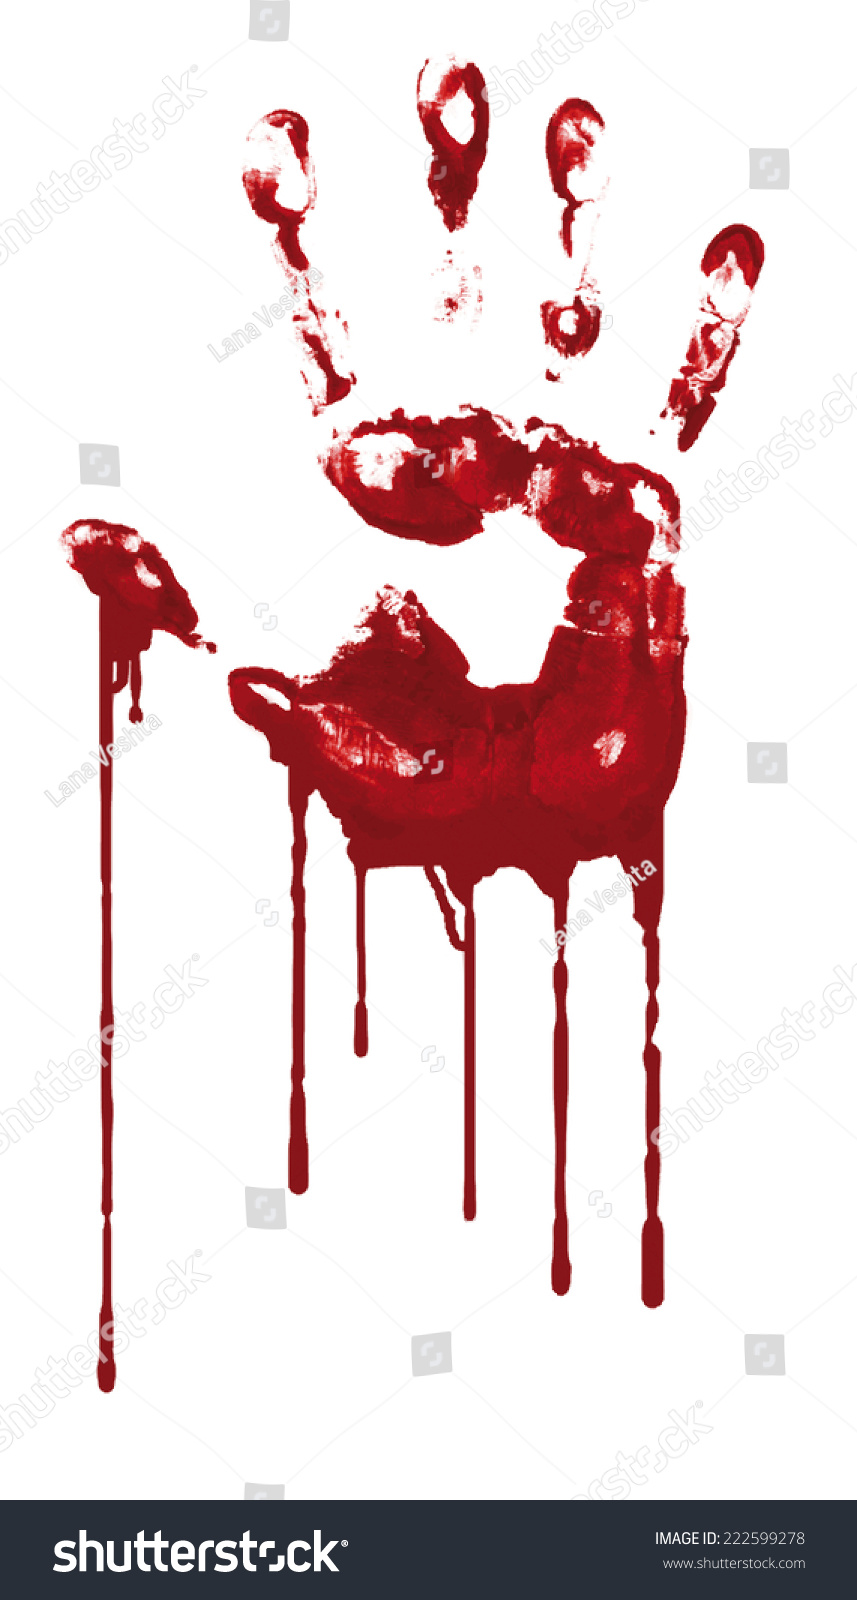 clipart bloody hand - photo #7